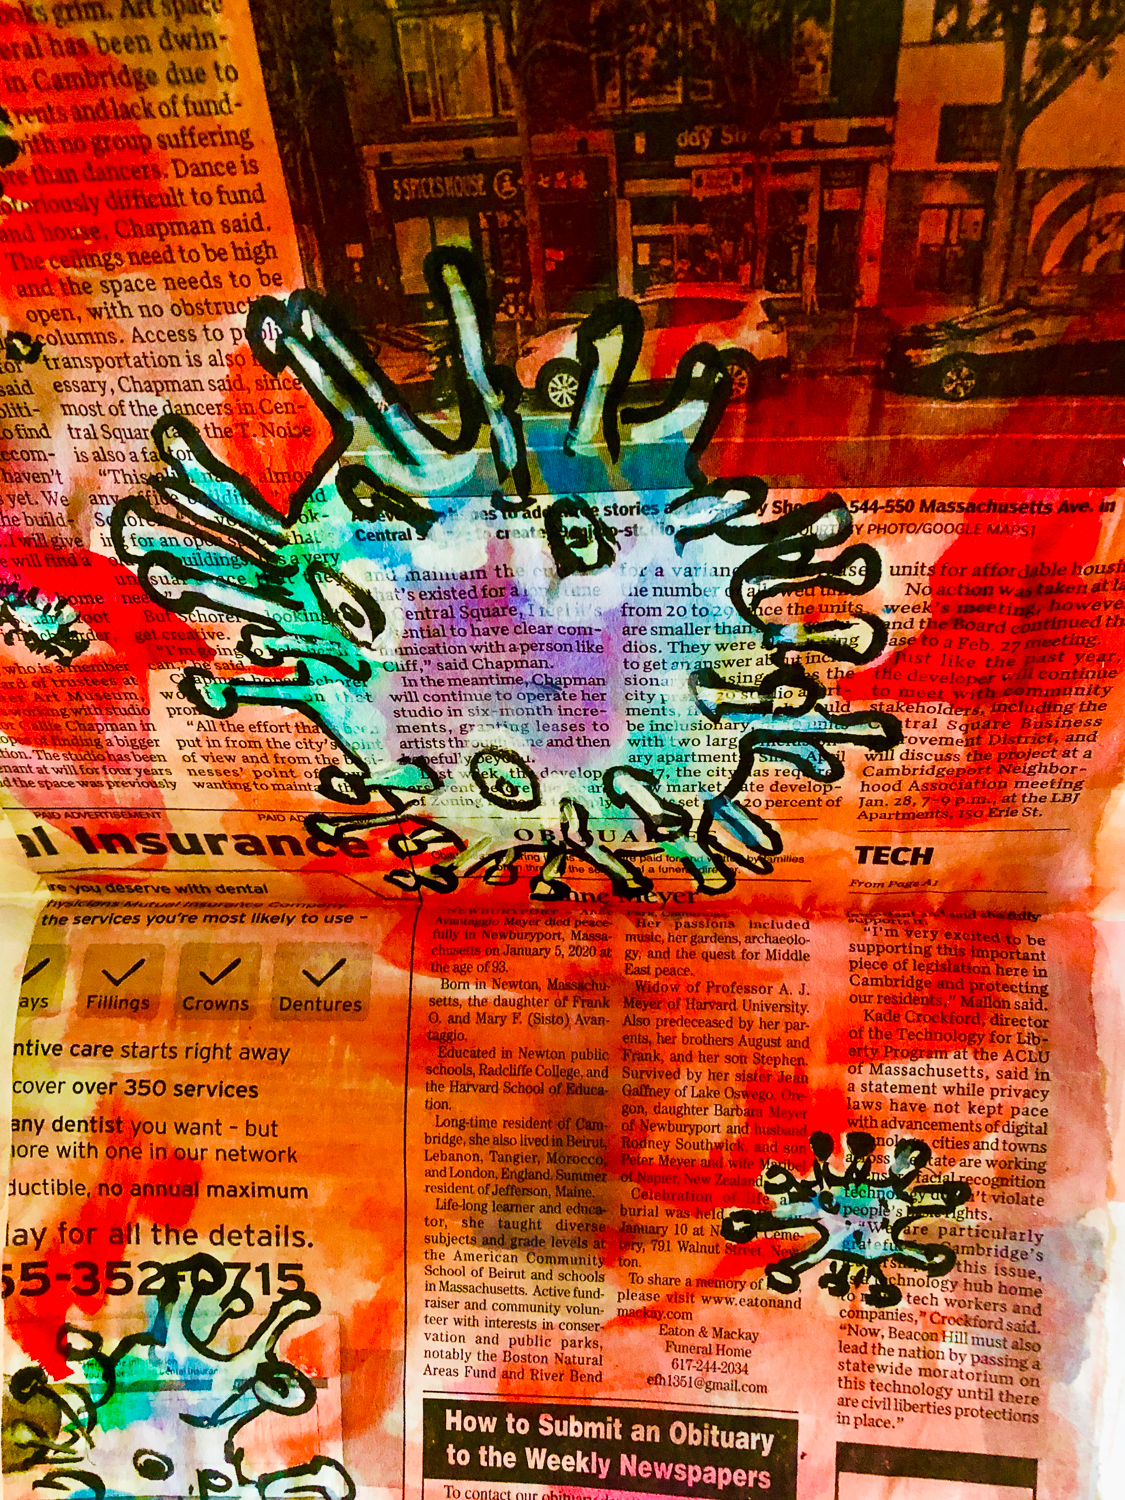 Artwork by Ara Parker of COVID-19 virus cell painted over a red background which is painted over a newspaper article